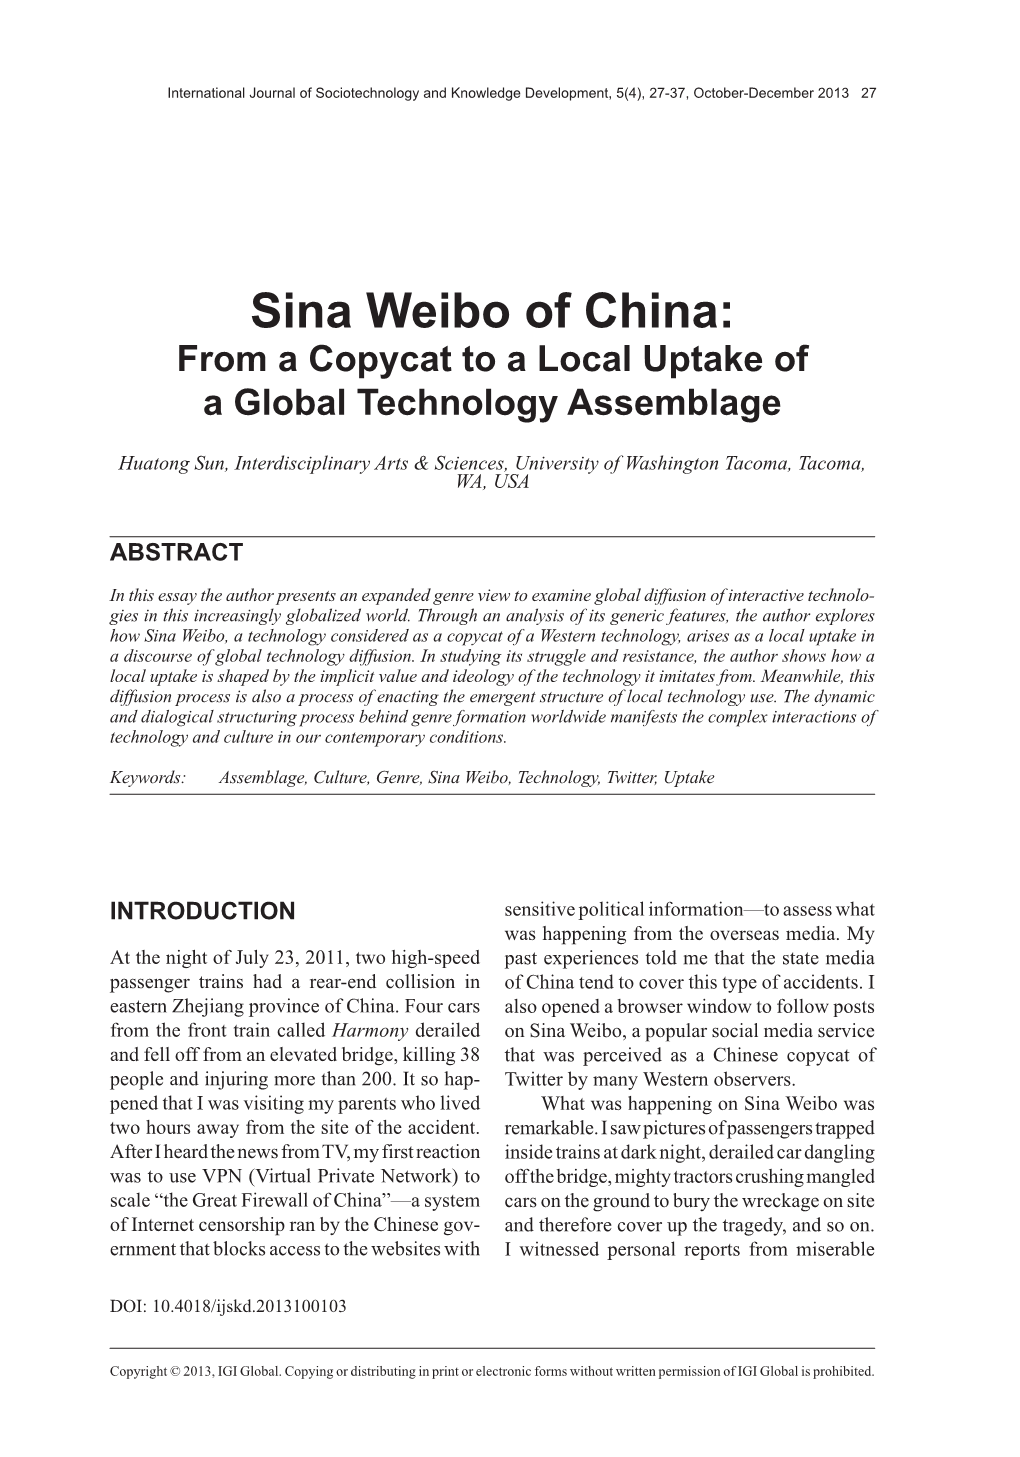 Sina Weibo of China: from a Copycat to a Local Uptake of a Global Technology Assemblage